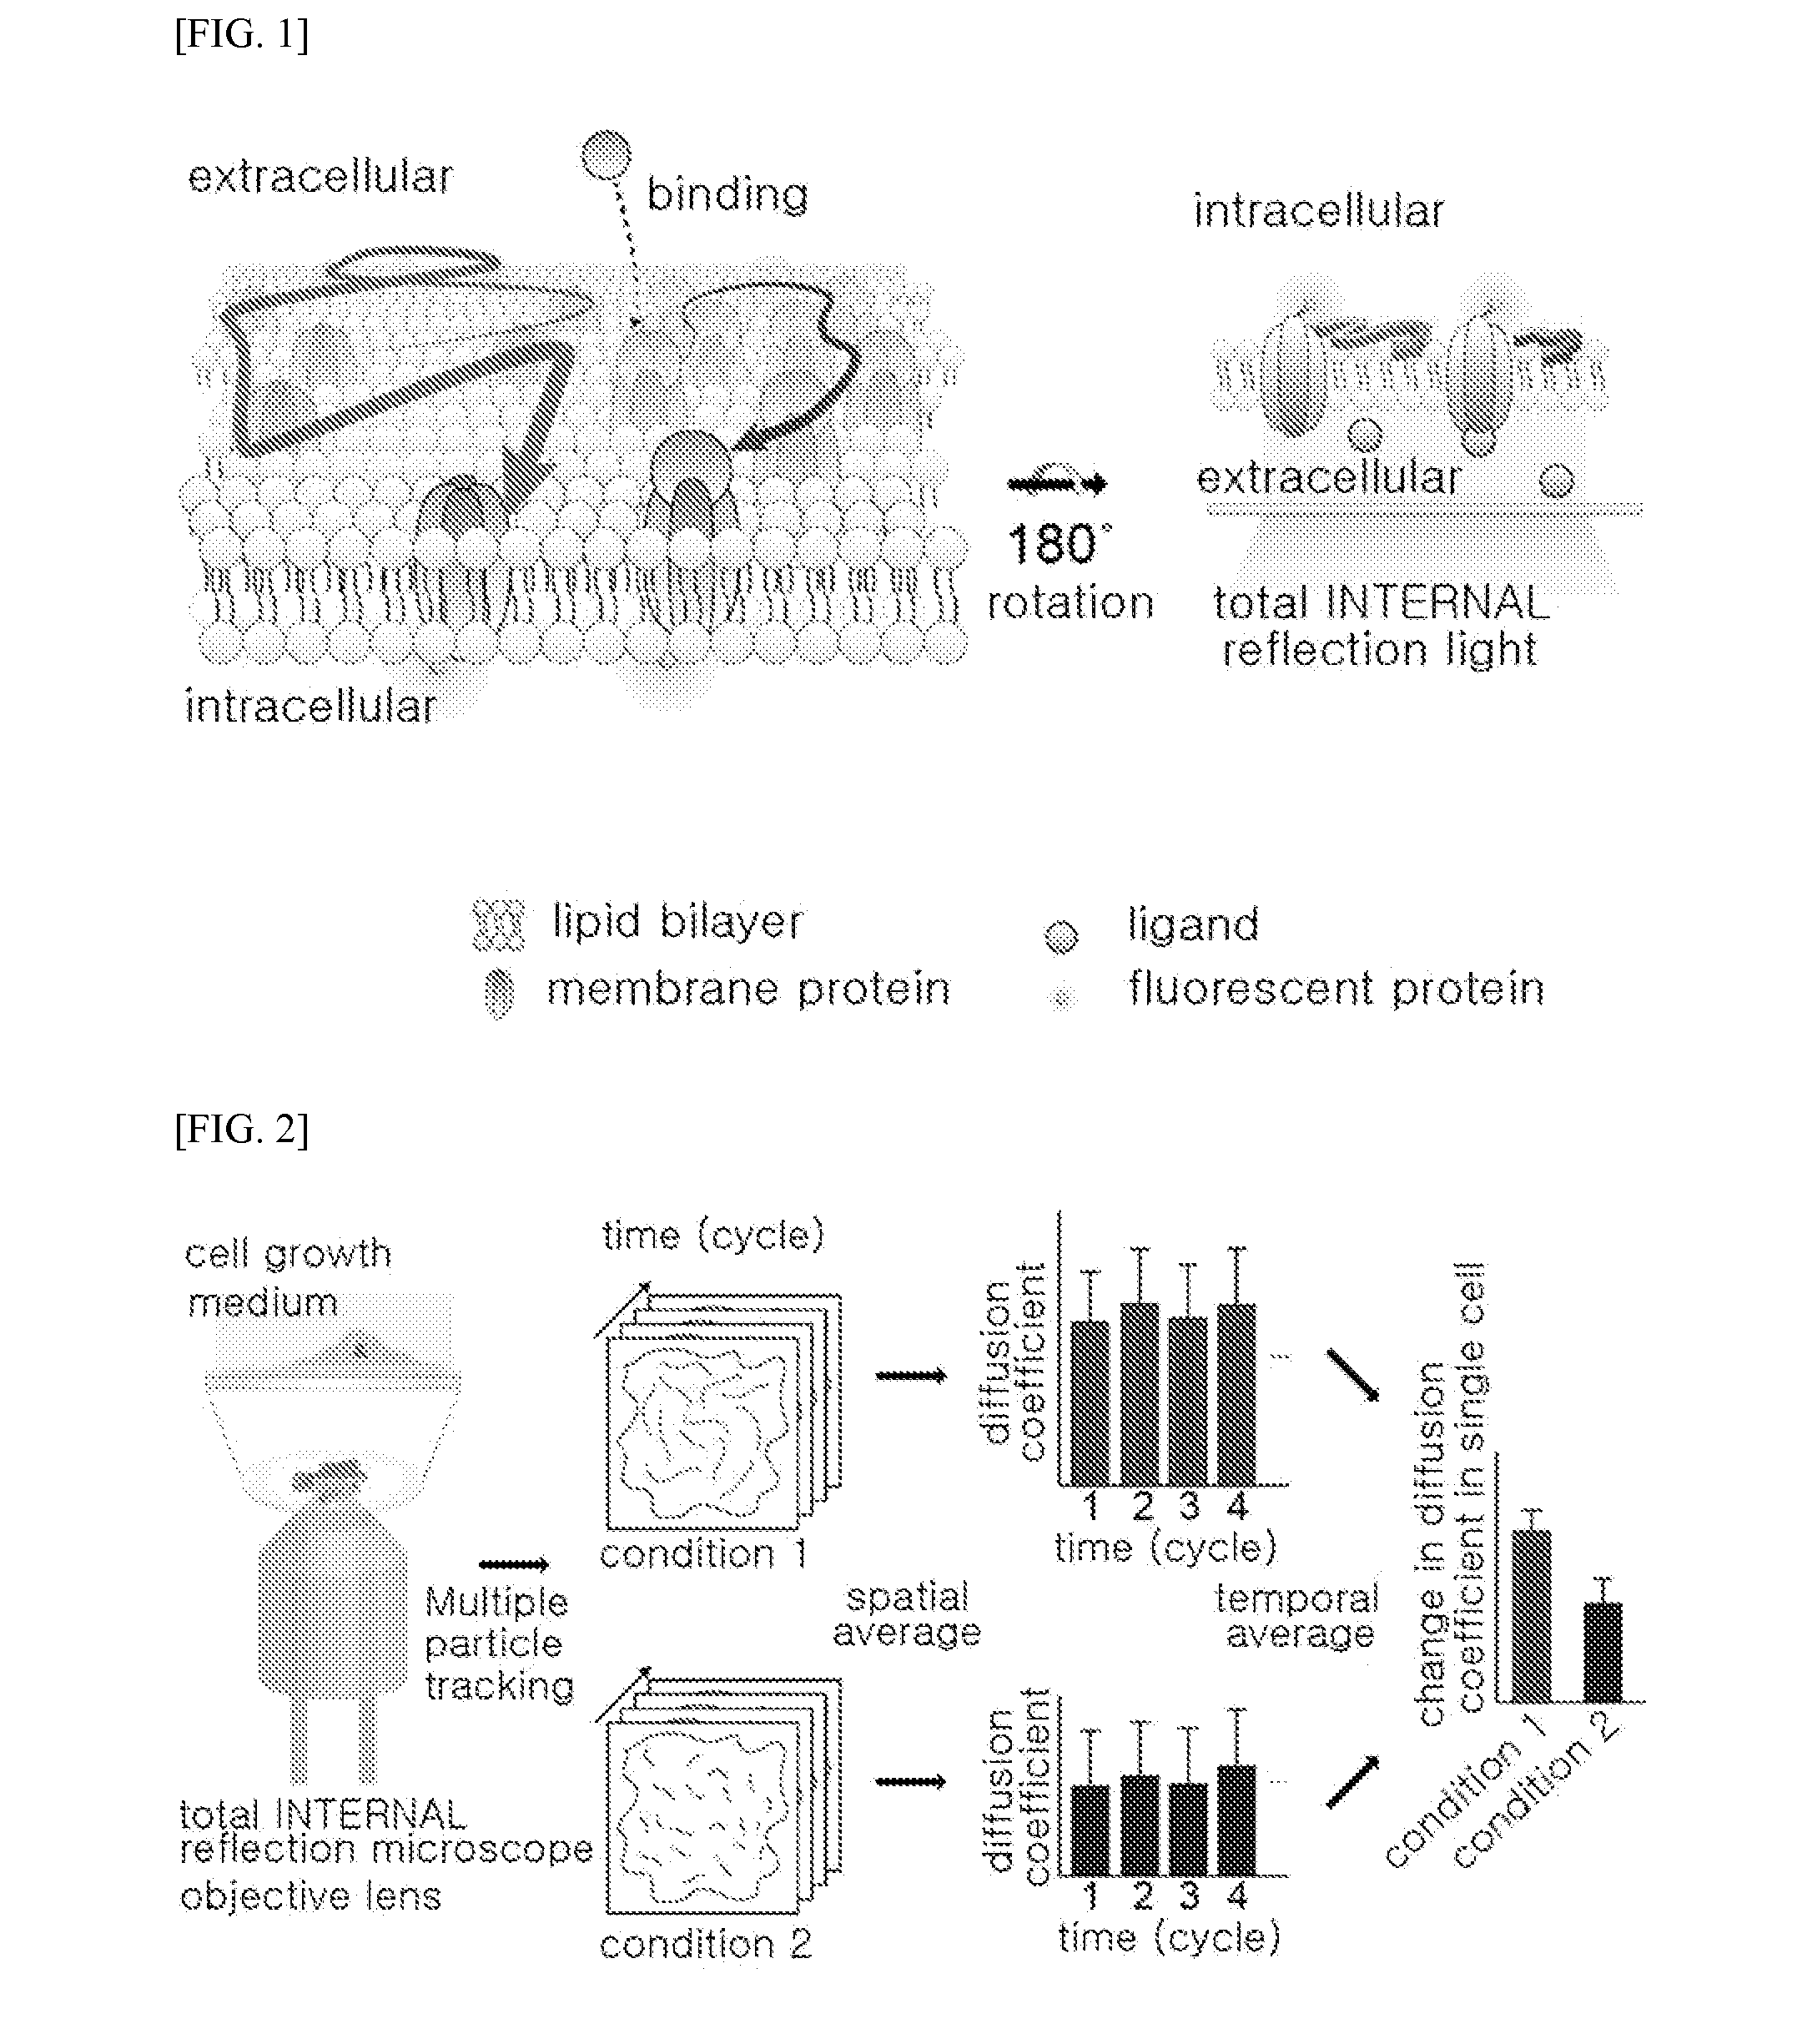 Method of analyzing binding aspect of membrane protein in a living cell